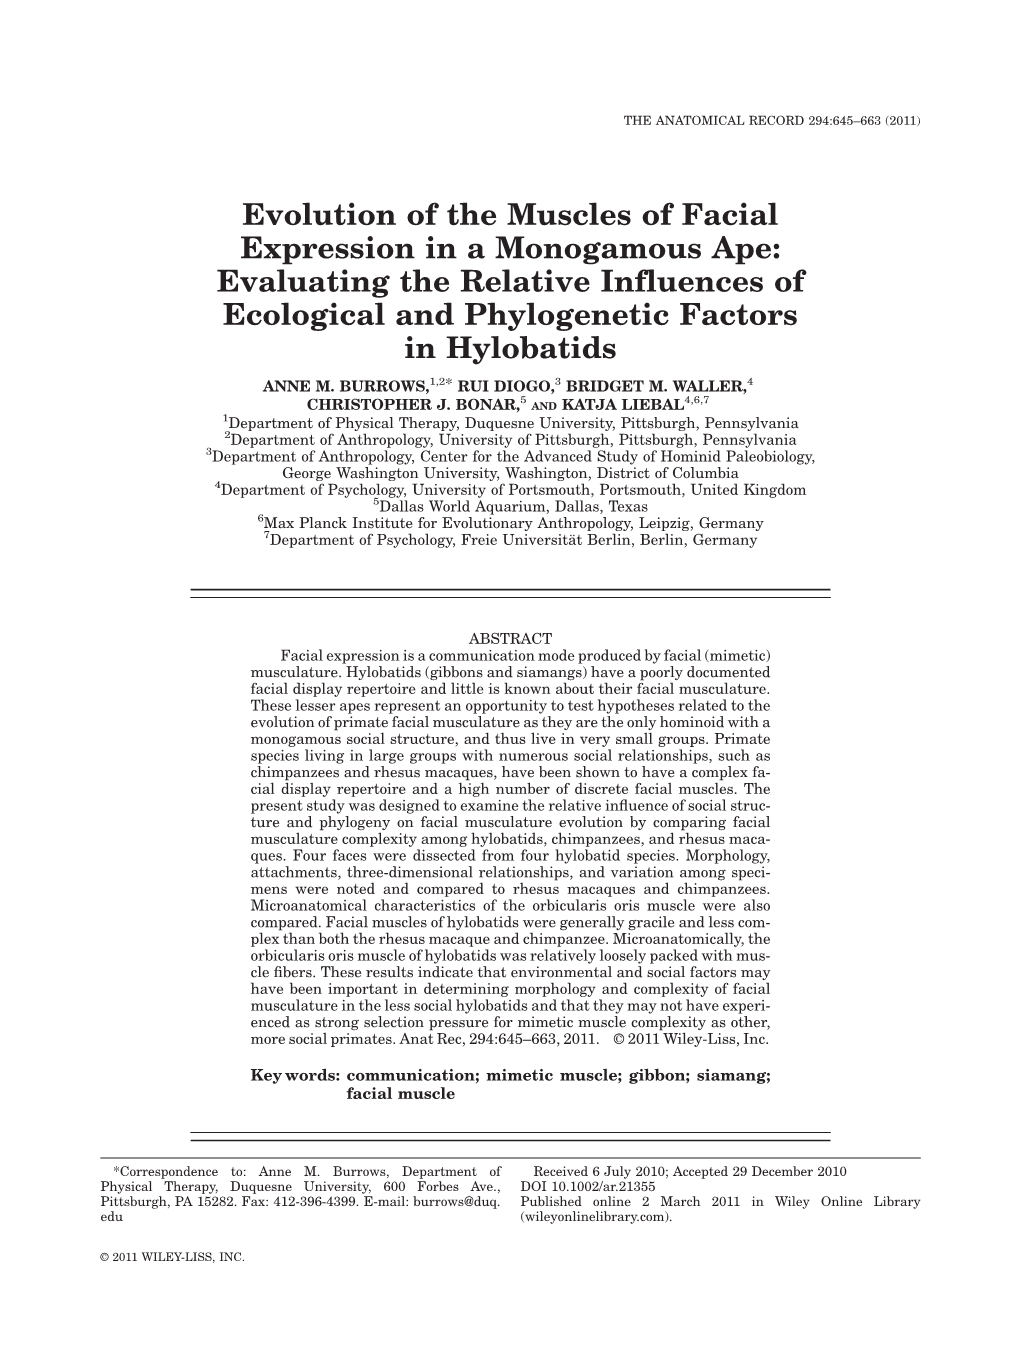 Evolution of the Muscles of Facial Expression in a Monogamous Ape: Evaluating the Relative Influences of Ecological and Phylogenetic Factors in Hylobatids